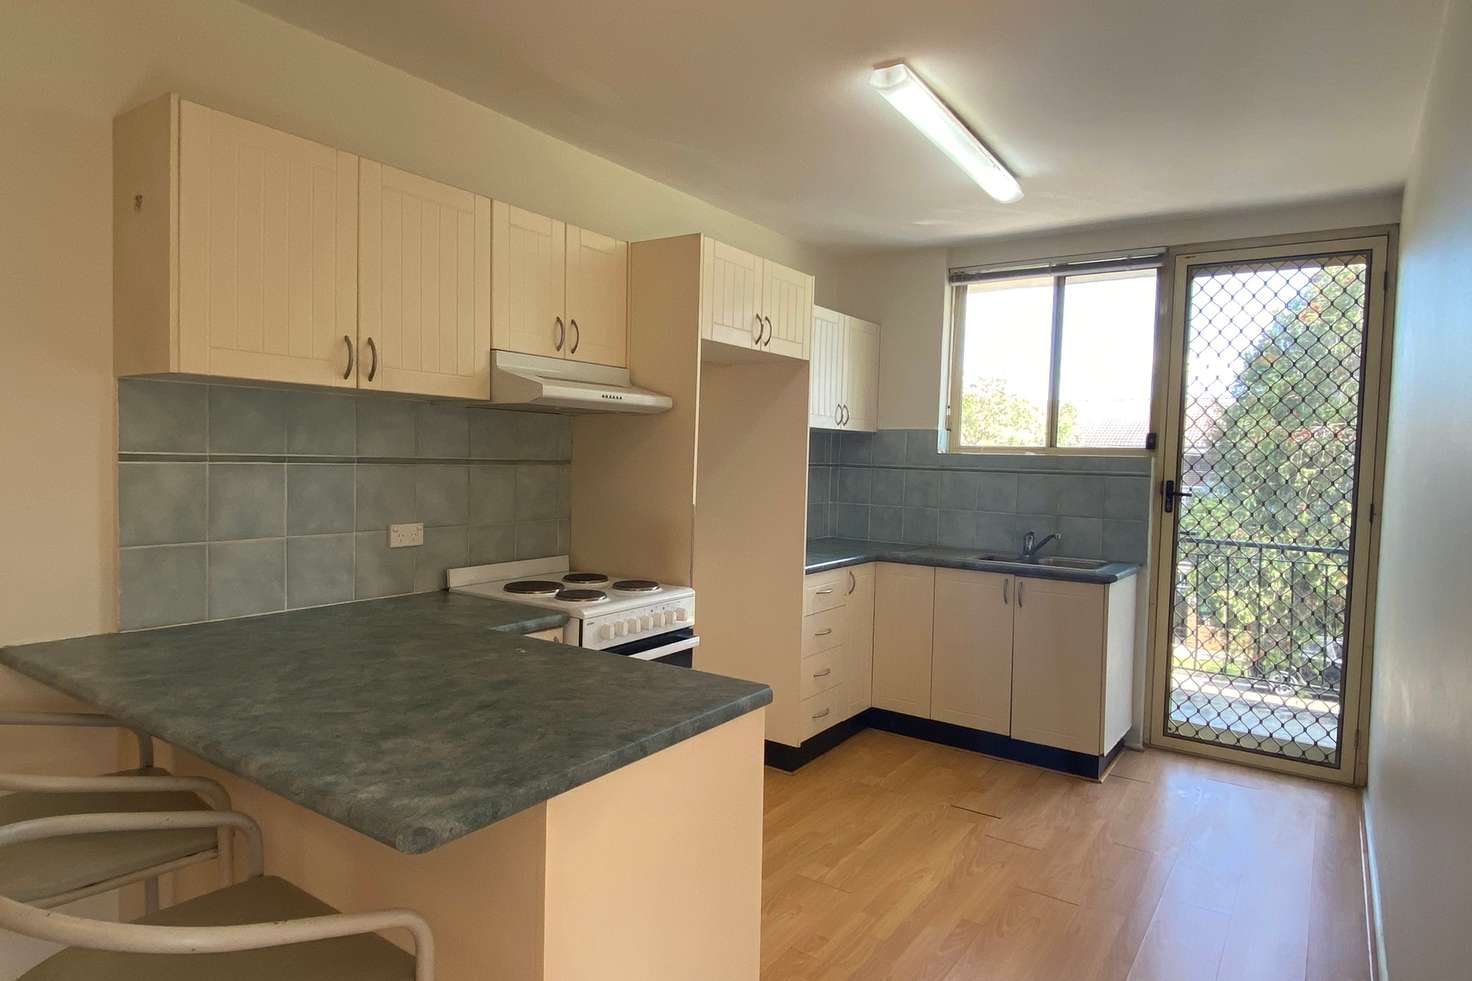 Main view of Homely apartment listing, 1/4 O'reilly Street, Parramatta NSW 2150